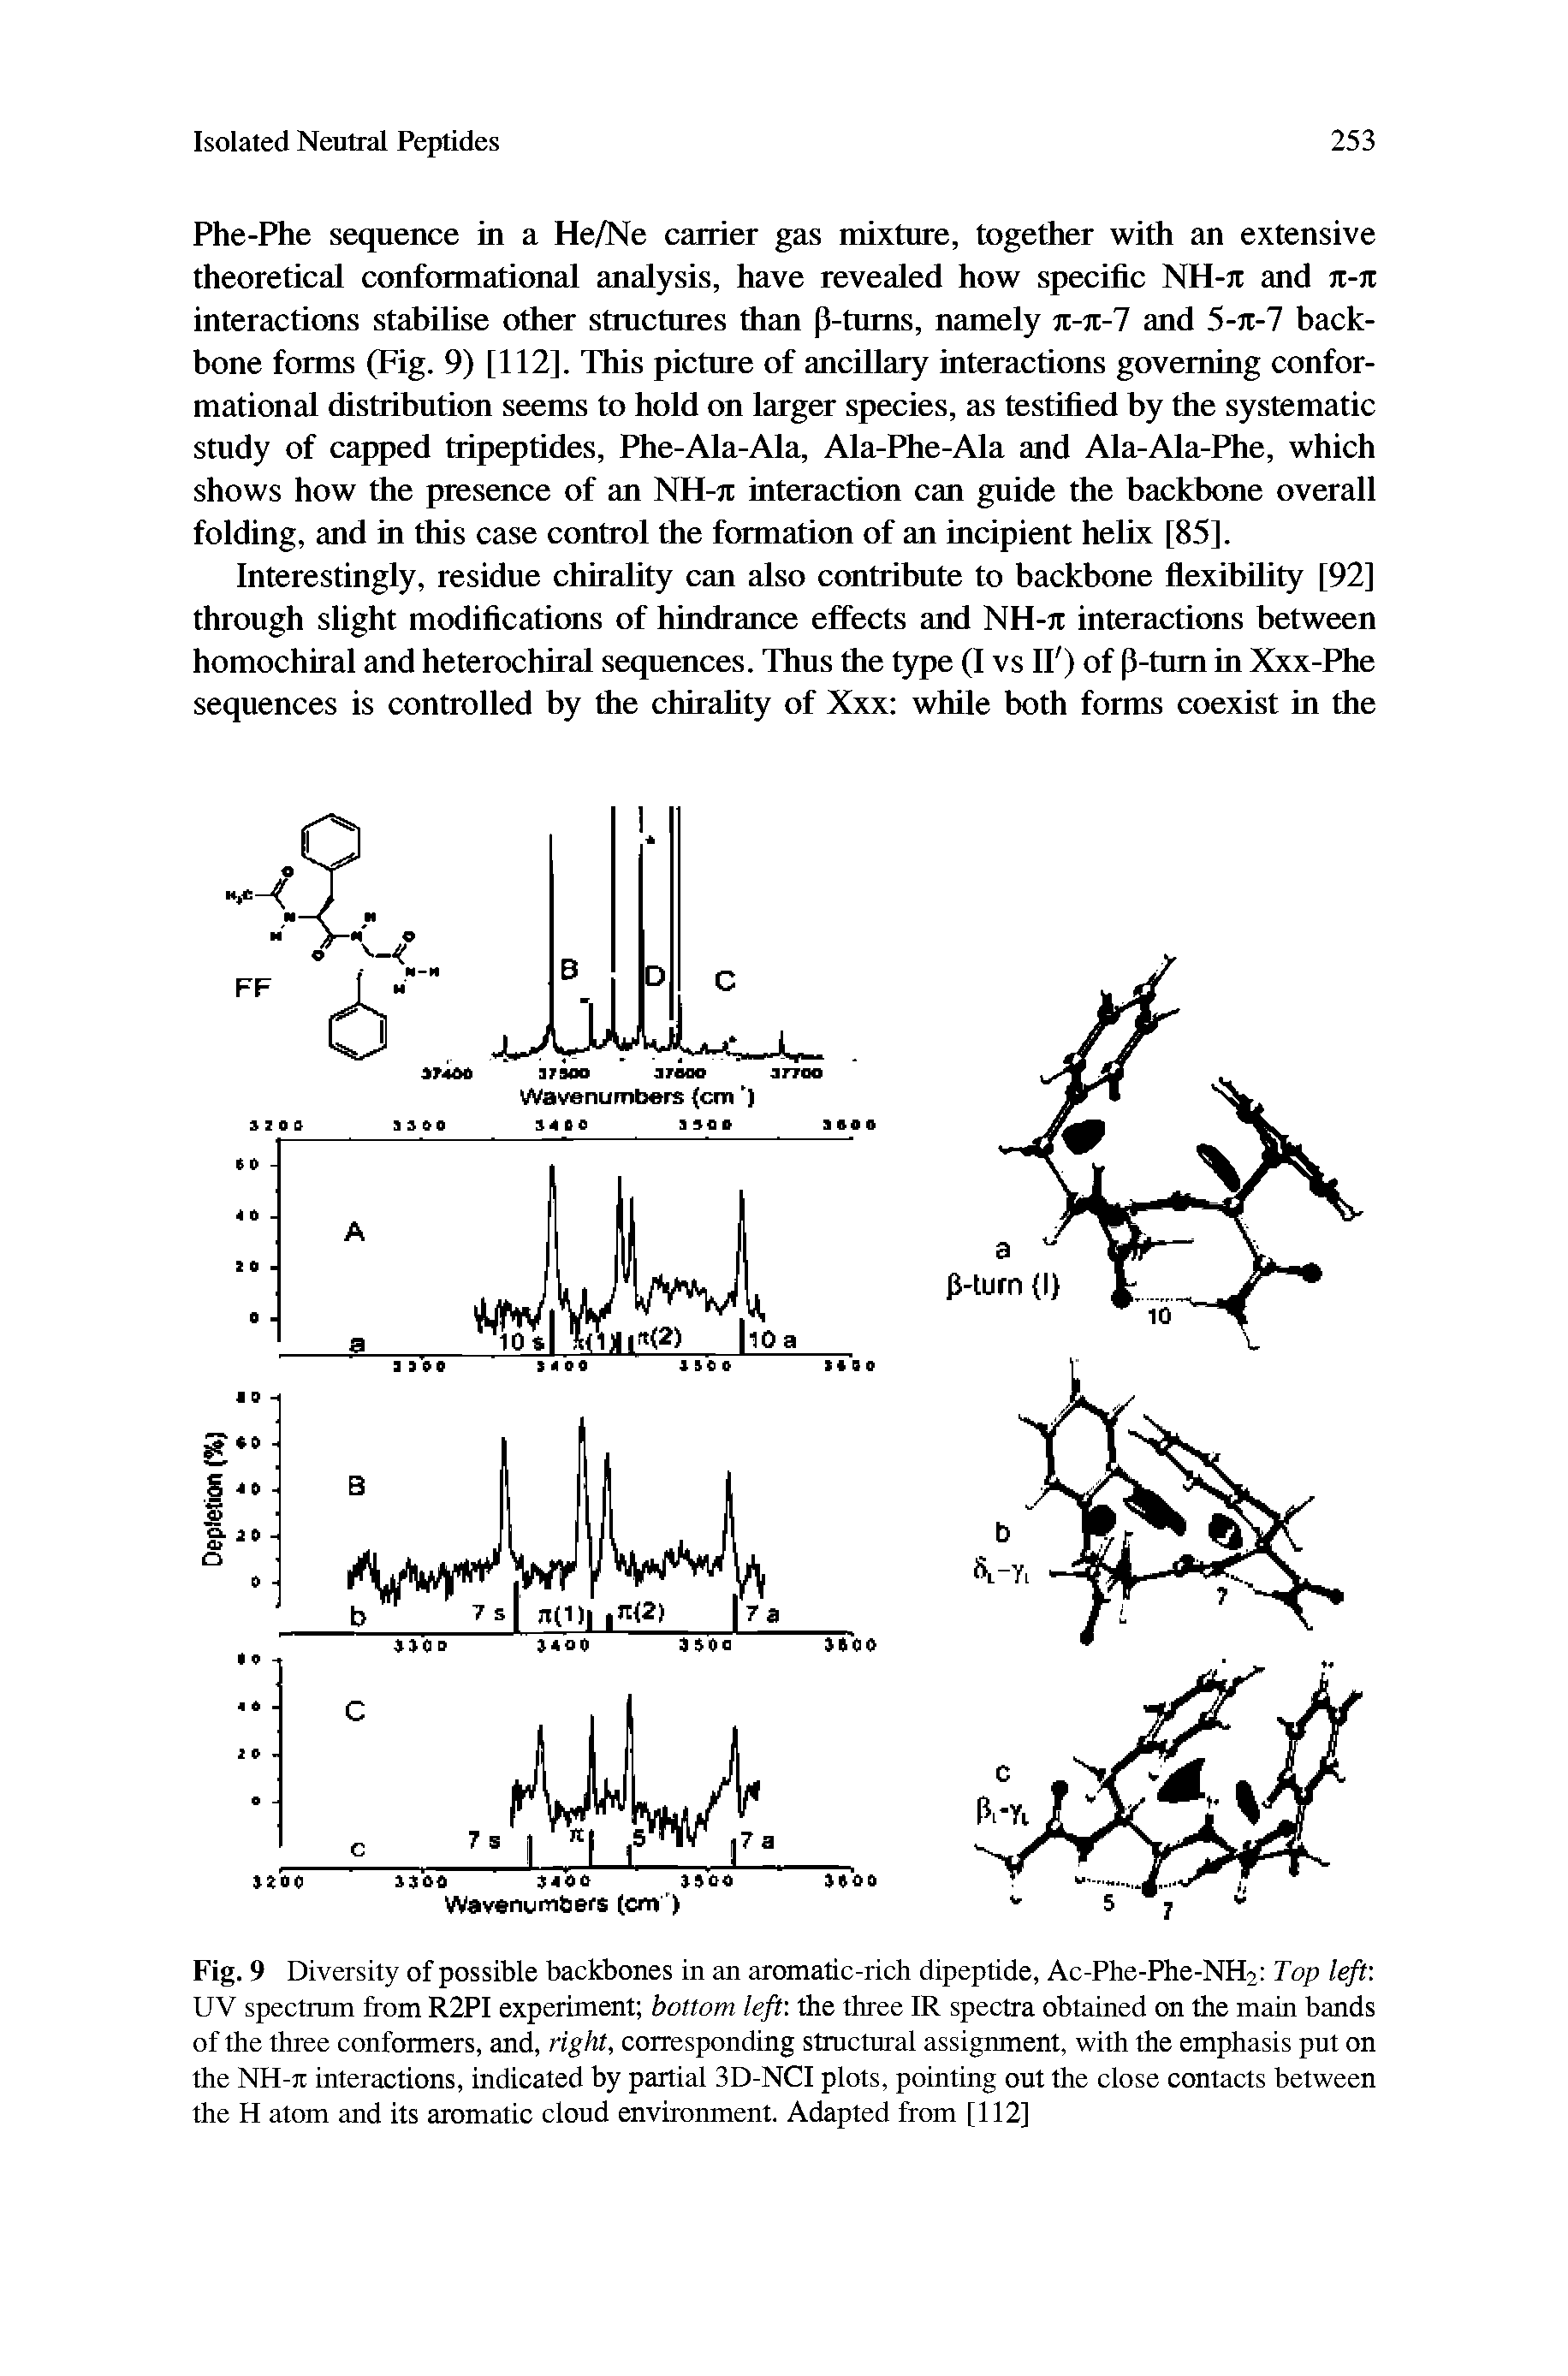 Fig. 9 Diversity of possible backbones in an aromatic-rich dipeptide, Ac-Phe-Phe-NH2 Top left UV spectrum from R2PI experiment bottom left the three IR spectra obtained on the main bands of the three conformers, and, right, corresponding structural assignment, with the emphasis put on the NH-it interactions, indicated by partial 3D-NCI plots, pointing out the close contacts between the H atom and its aromatic cloud environment. Adapted from [112]...